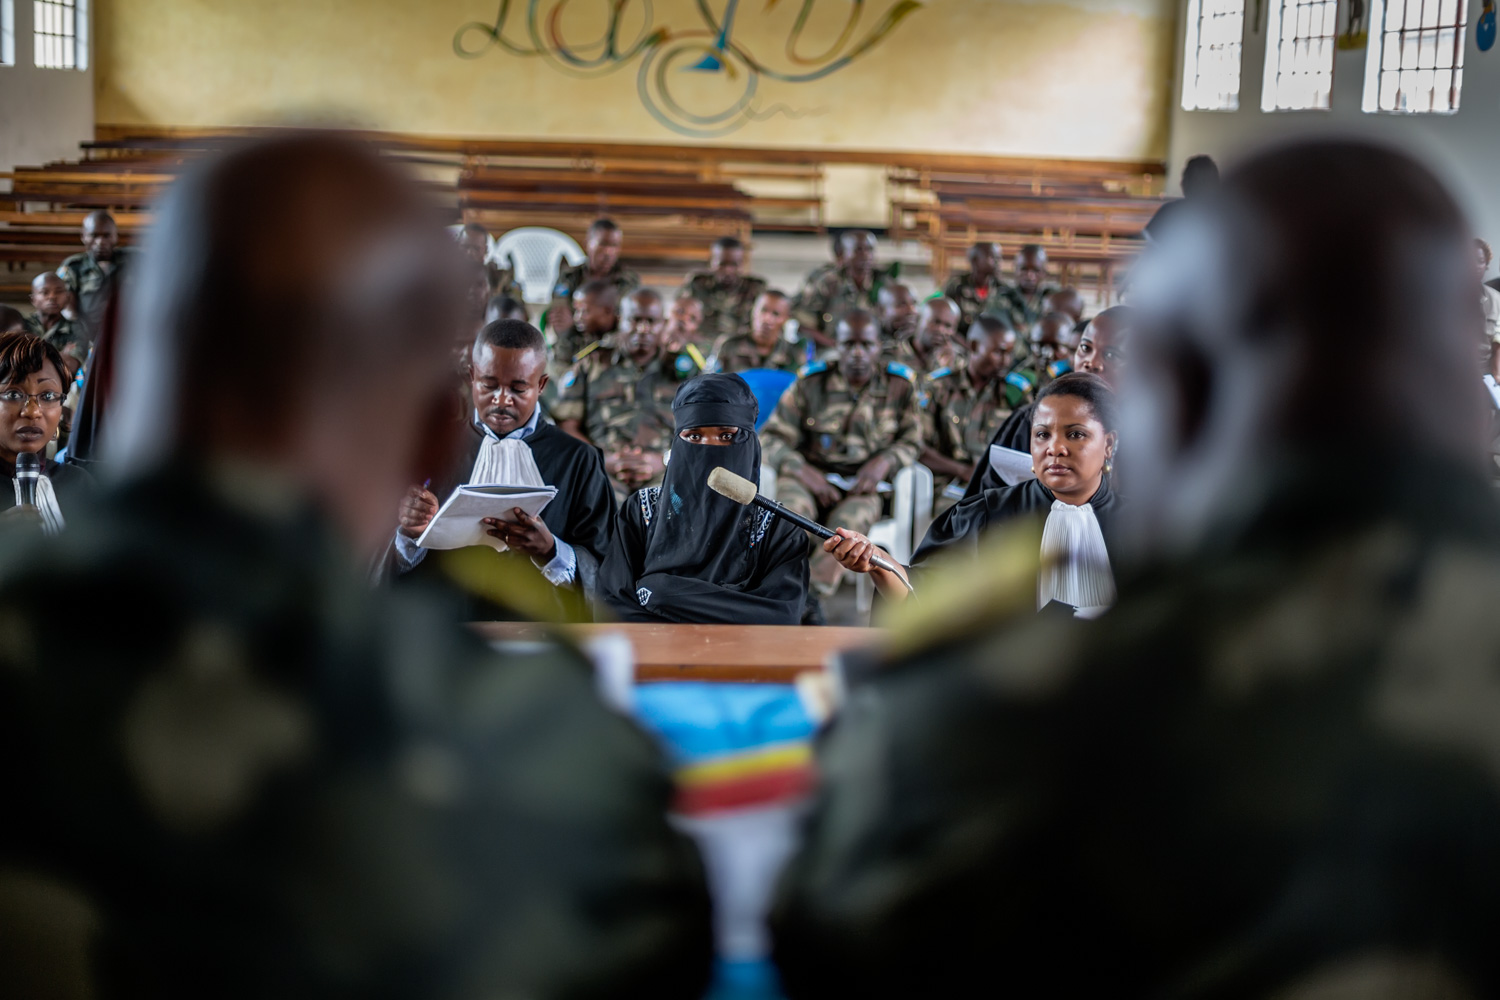  A victim testifies before the closed military tribunal. A member of the prosecution team holds a microphone up for her while a defense lawyer makes notes. The accused soldiers are seated in the rear. Victims are often extremely reluctant to step for